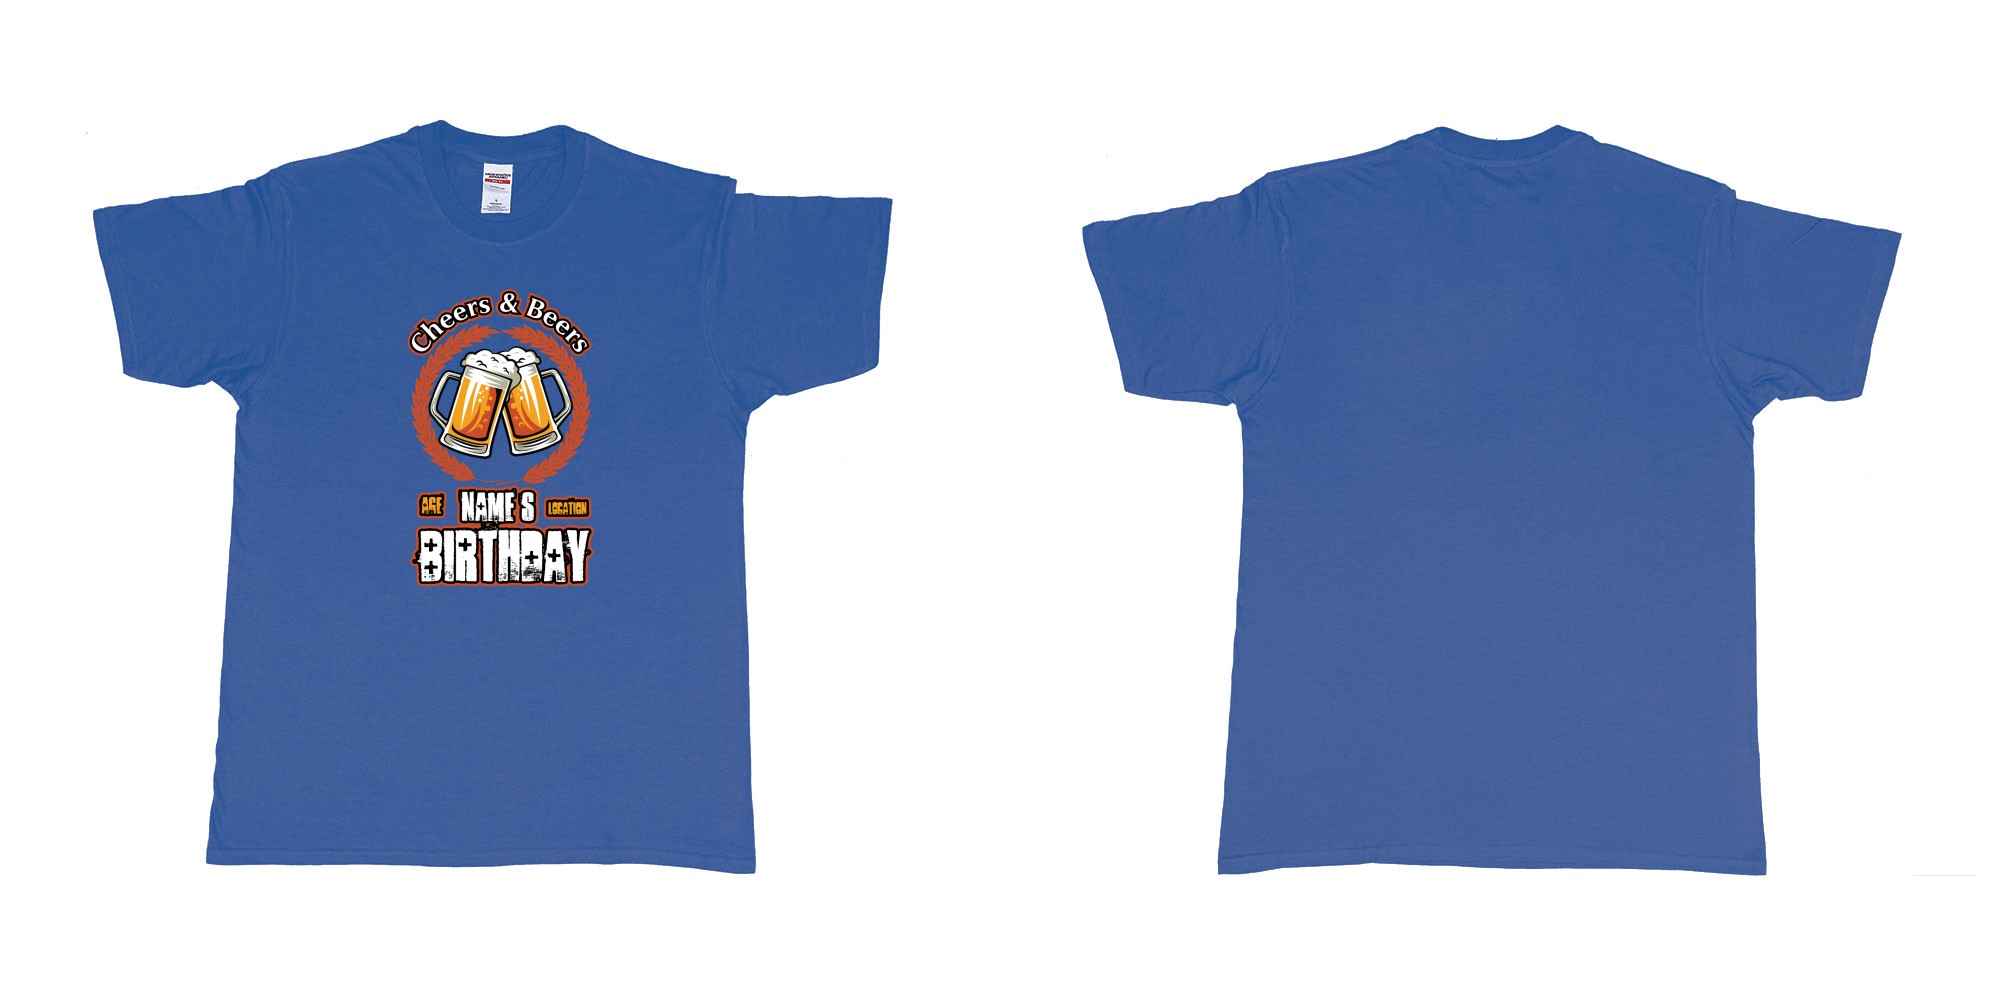 Custom tshirt design cheers and beers birthday in fabric color royal-blue choice your own text made in Bali by The Pirate Way